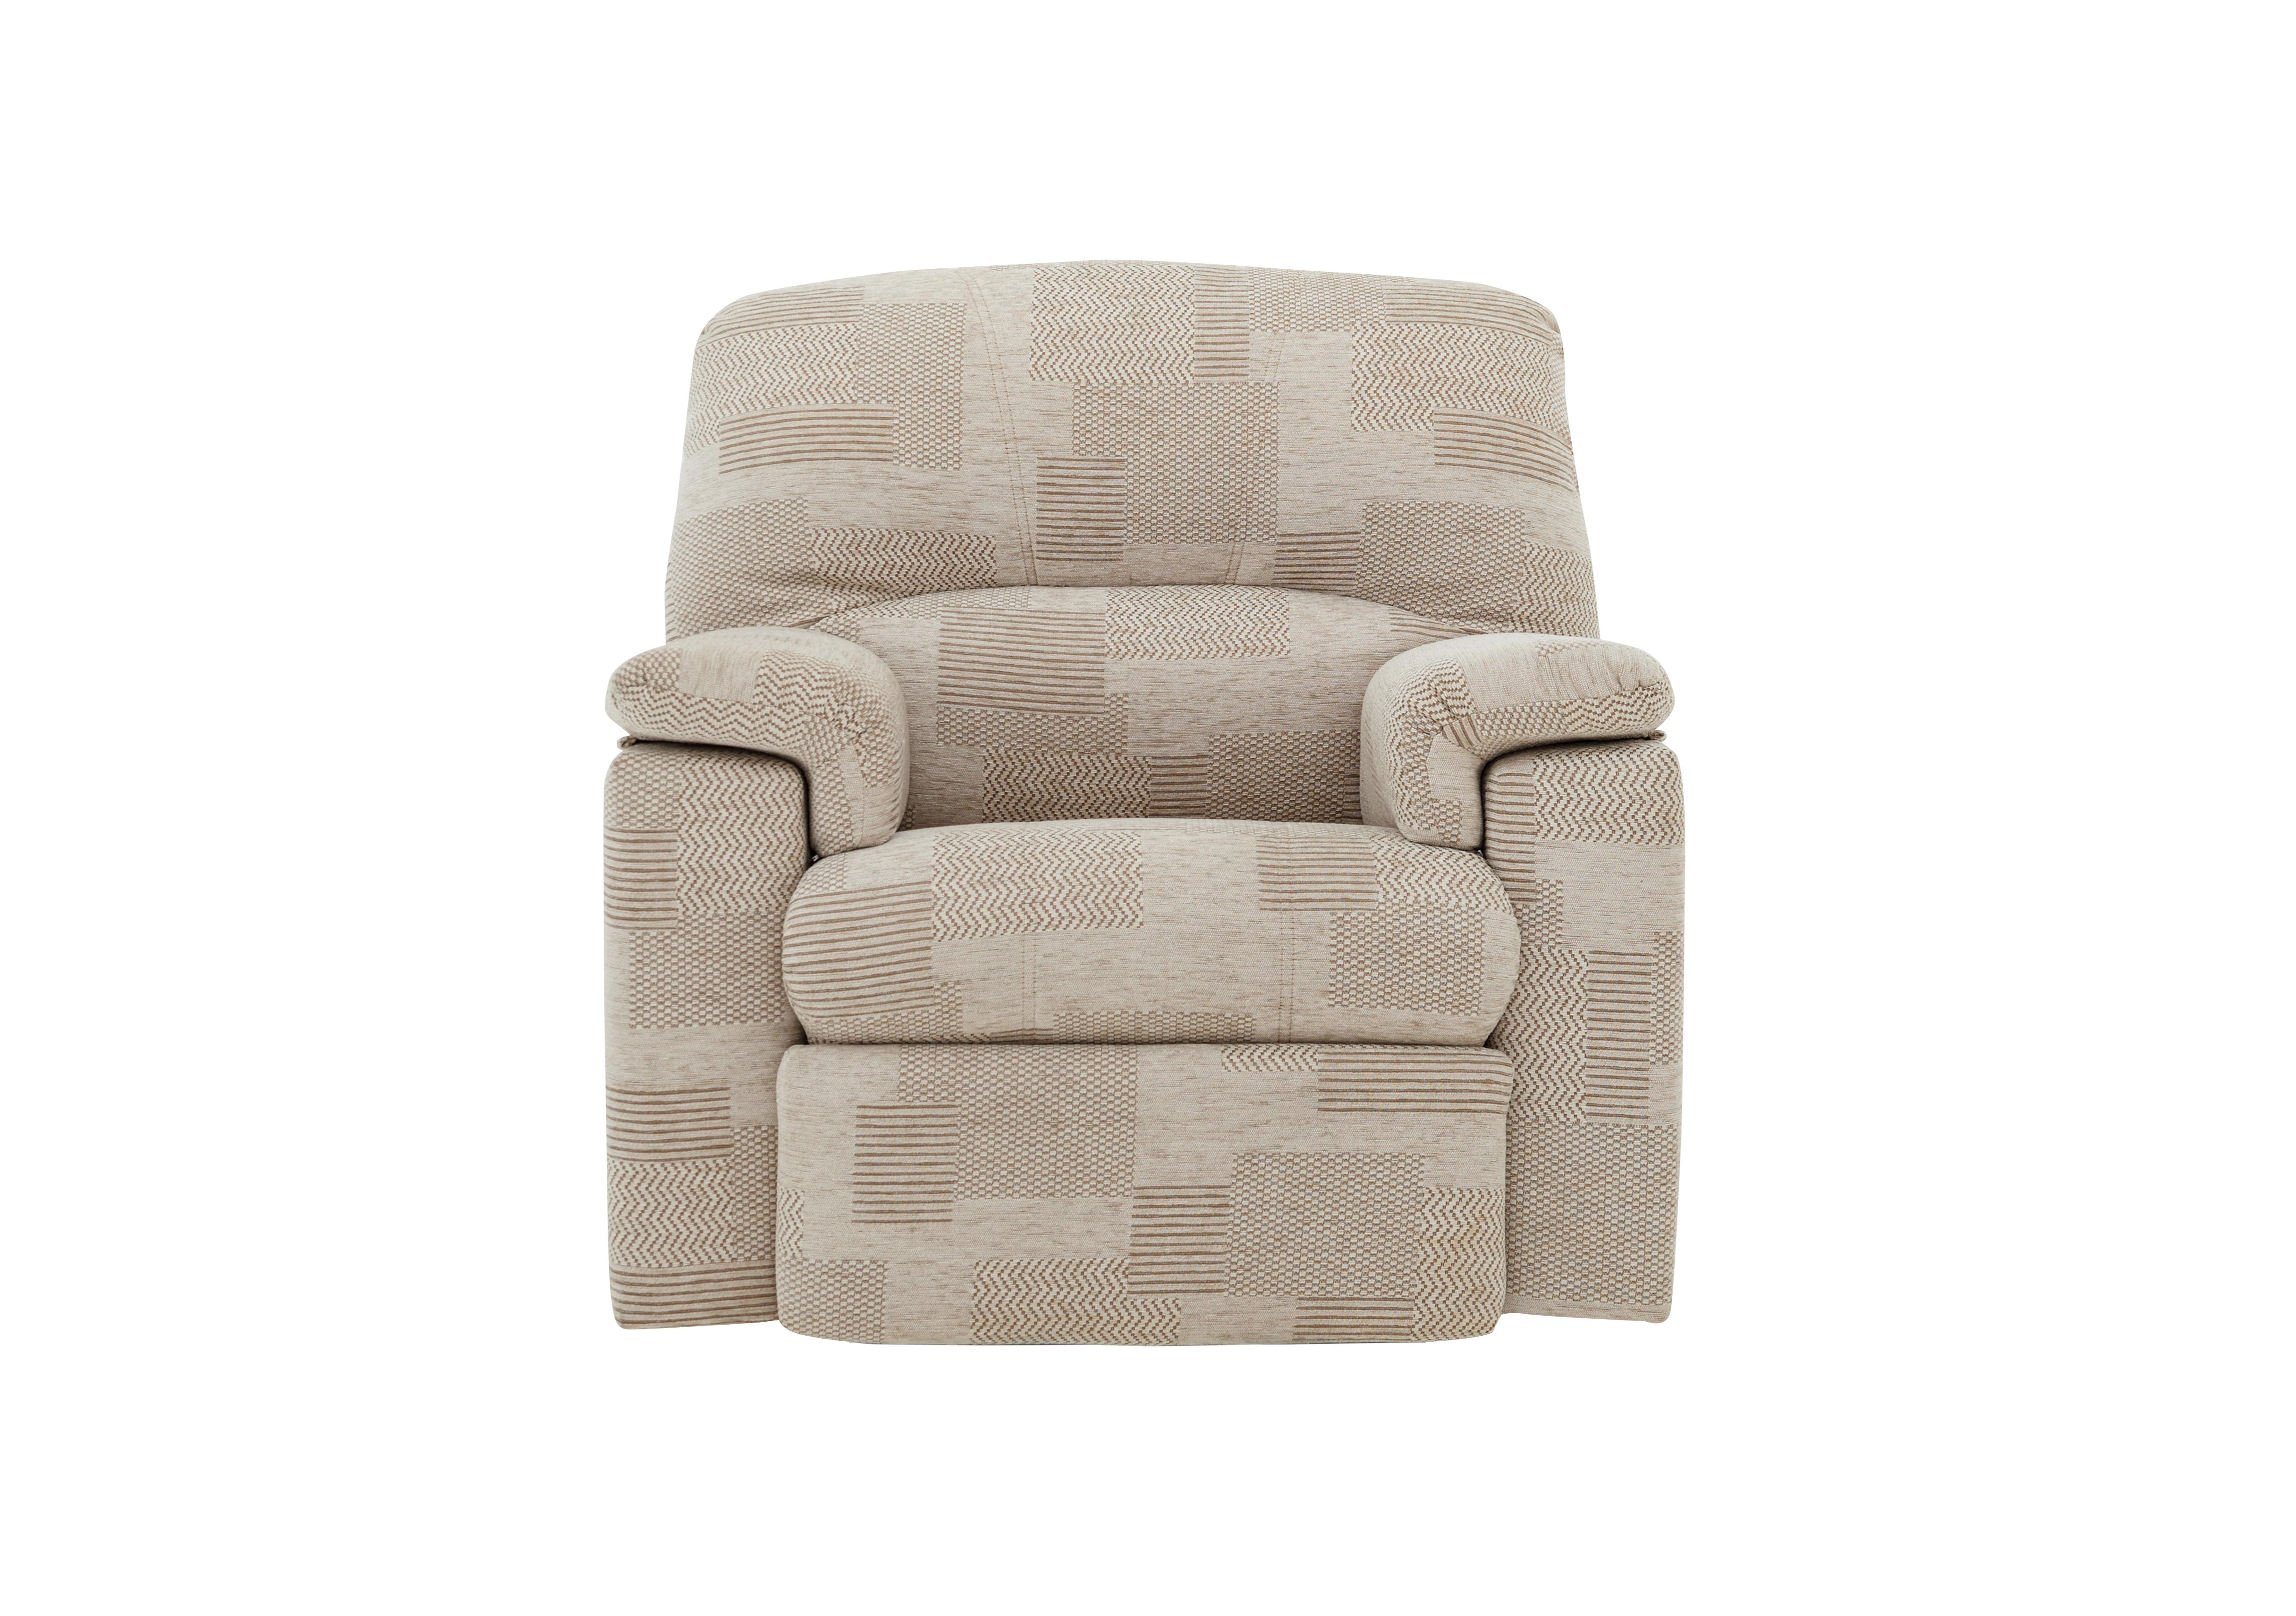 Chloe Fabric Armchair in C008 Checkers Putty on Furniture Village